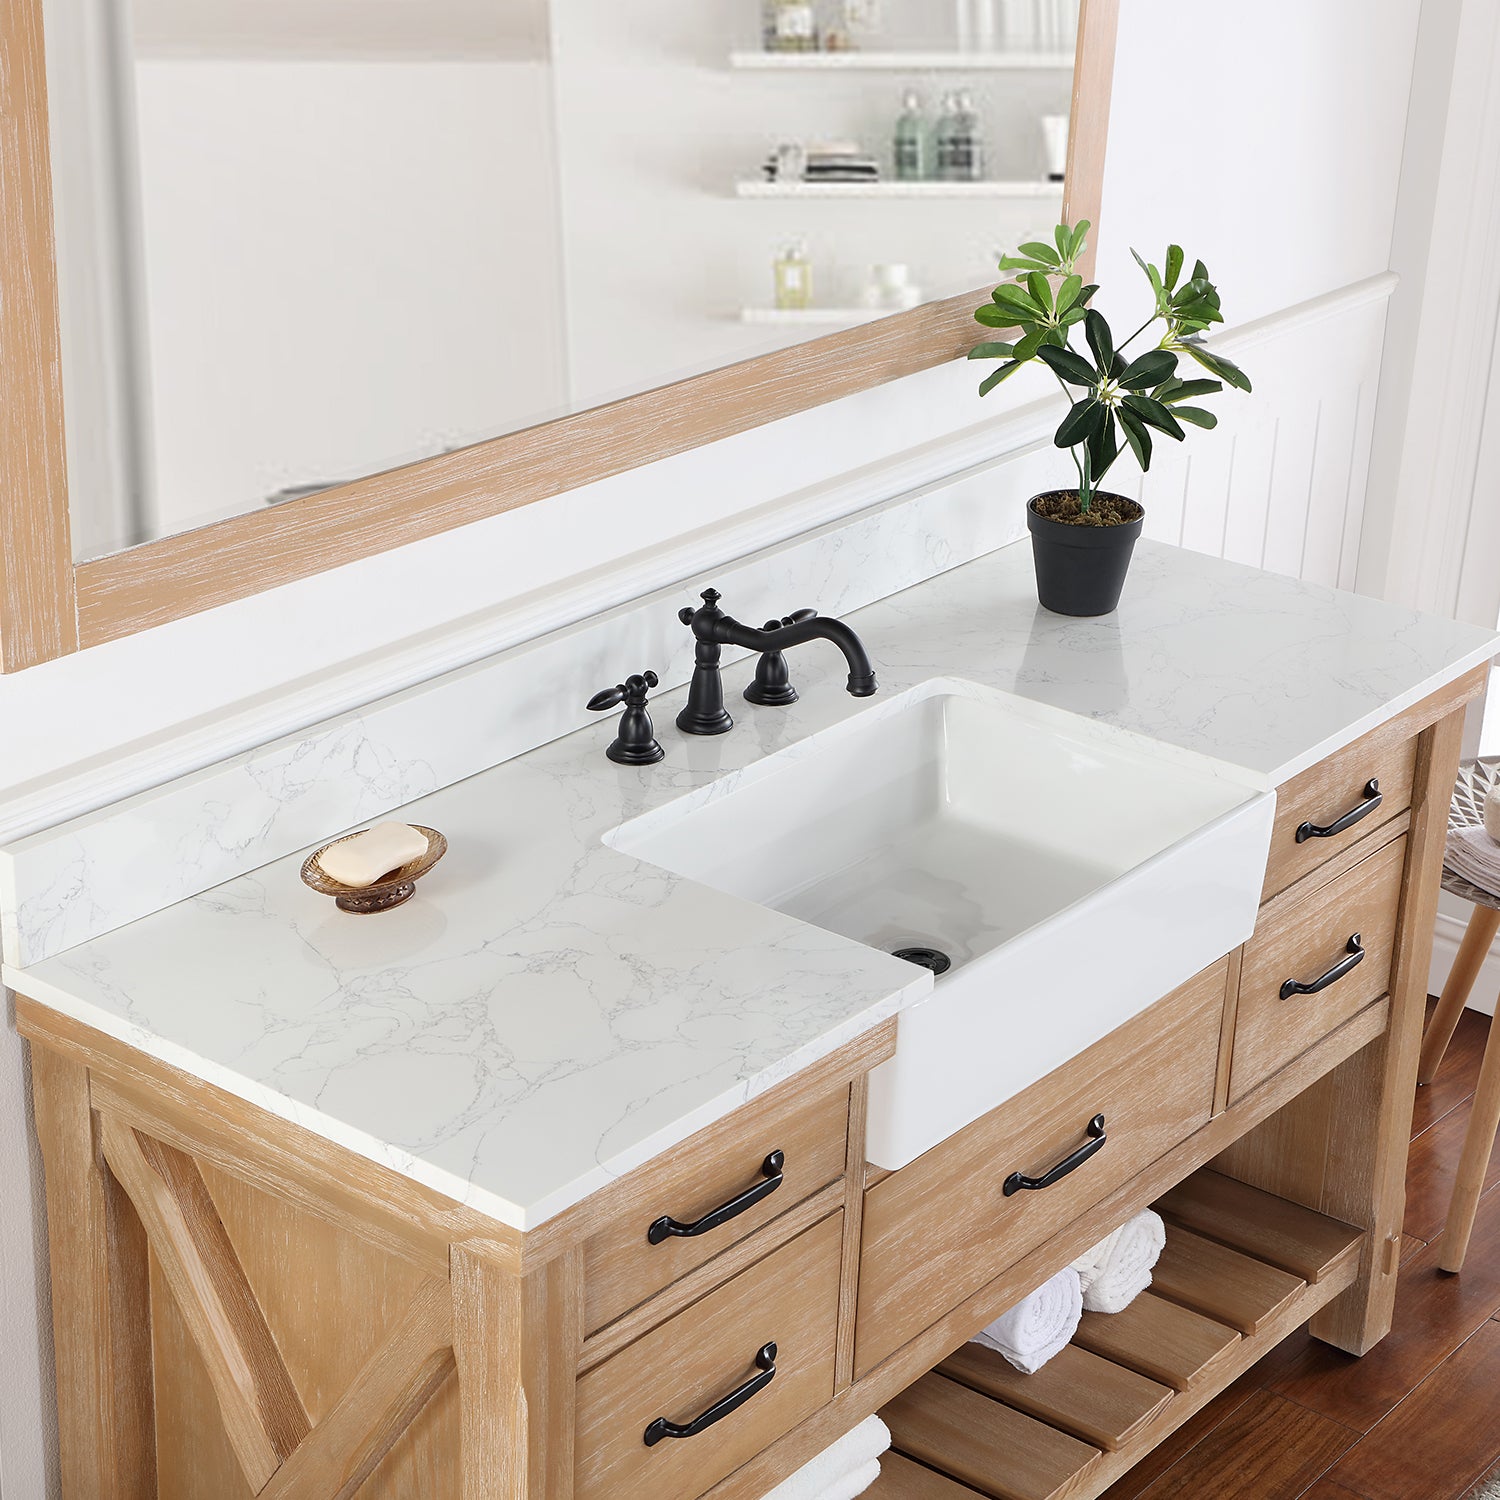 Villareal 60" Single Vanity in Weathered Pine with Composite Stone Top in White, White Farmhouse Basin